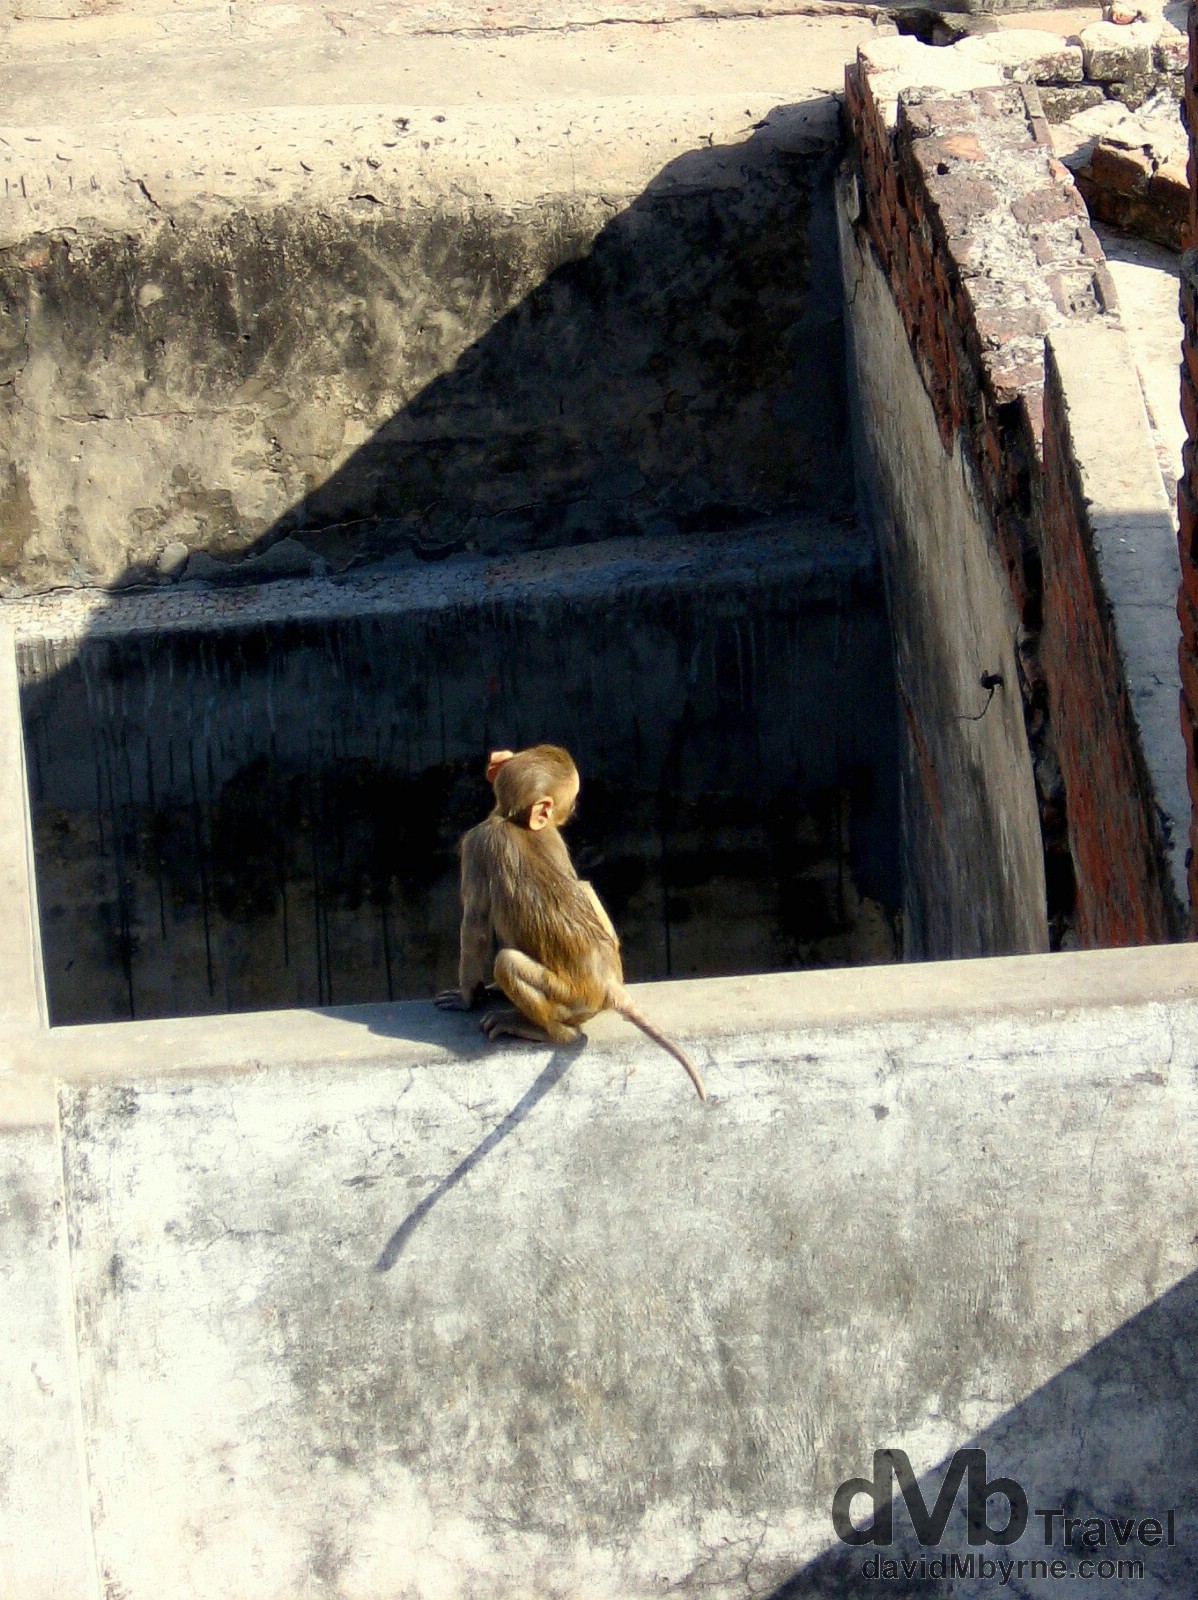 A monkey on the rooftop of a dwelling in Varanasi, India. March 18th 2008.